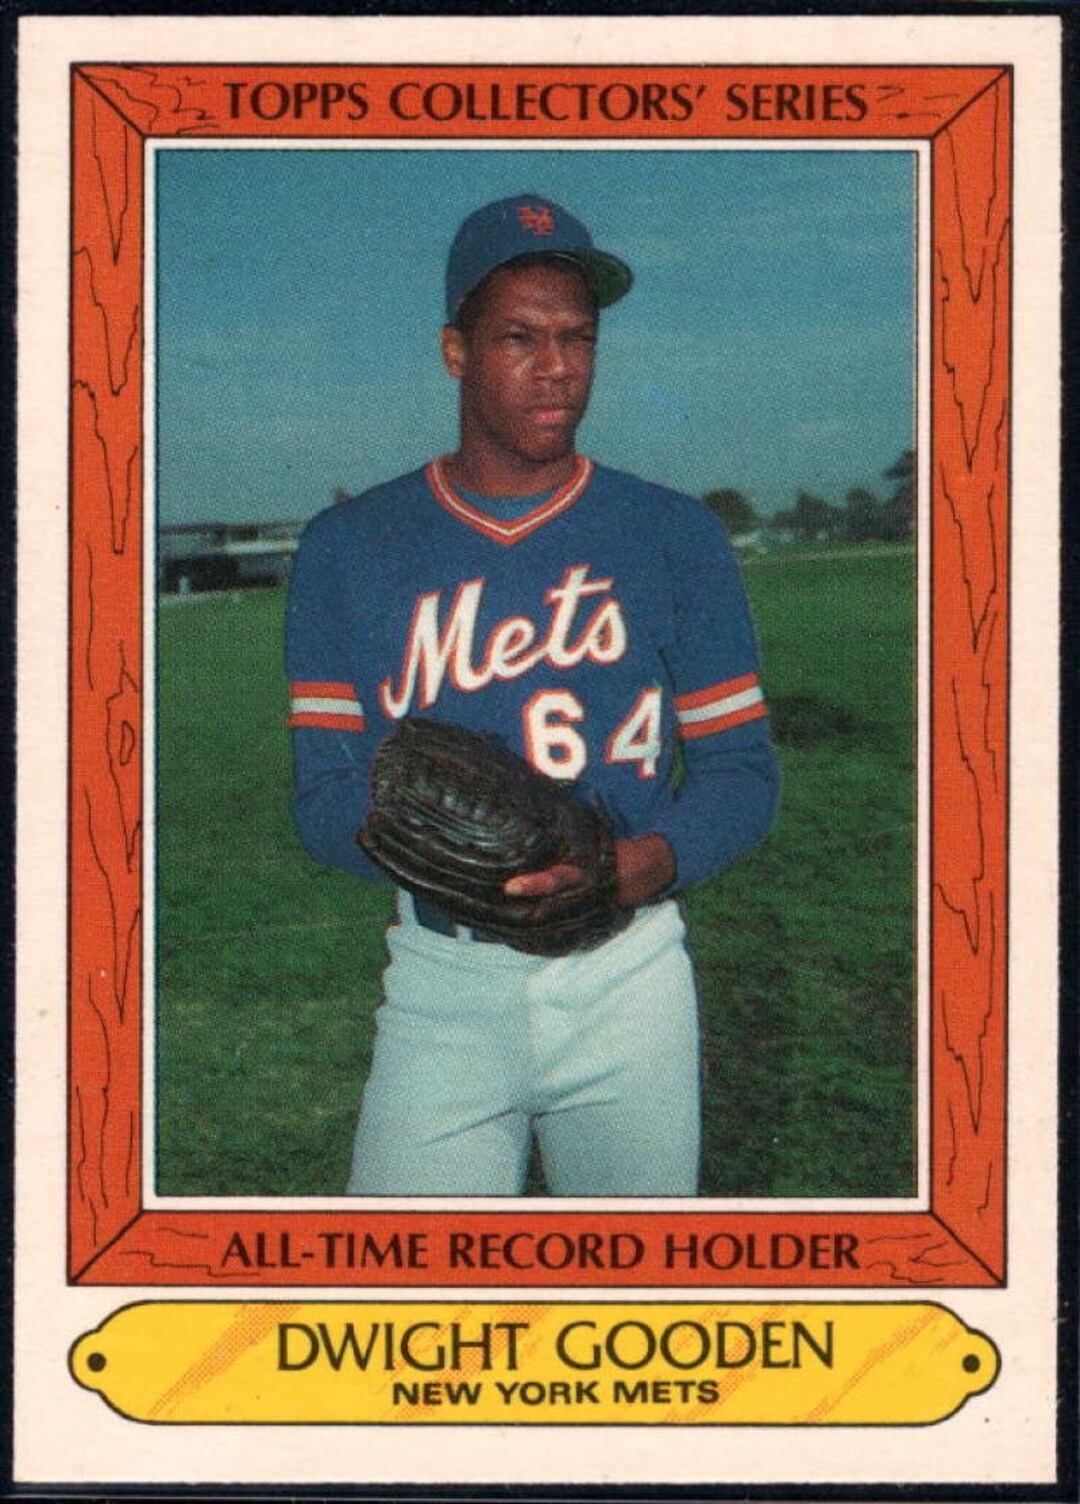 Dwight Gooden 1985 Topps Collectors Series 16 